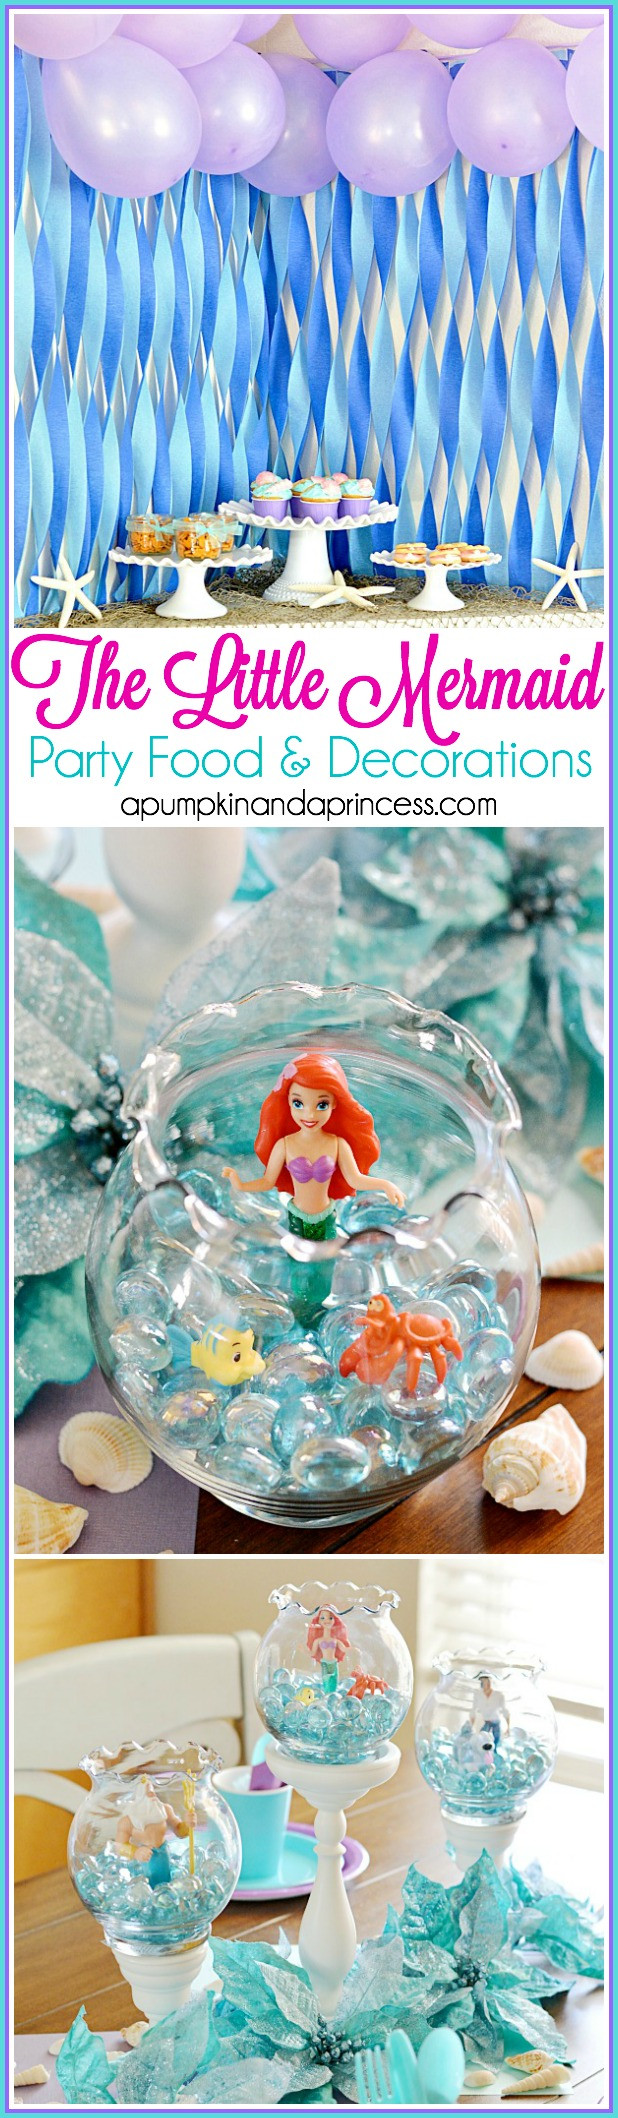 Mermaid Birthday Decorations
 The Little Mermaid Party A Pumpkin And A Princess